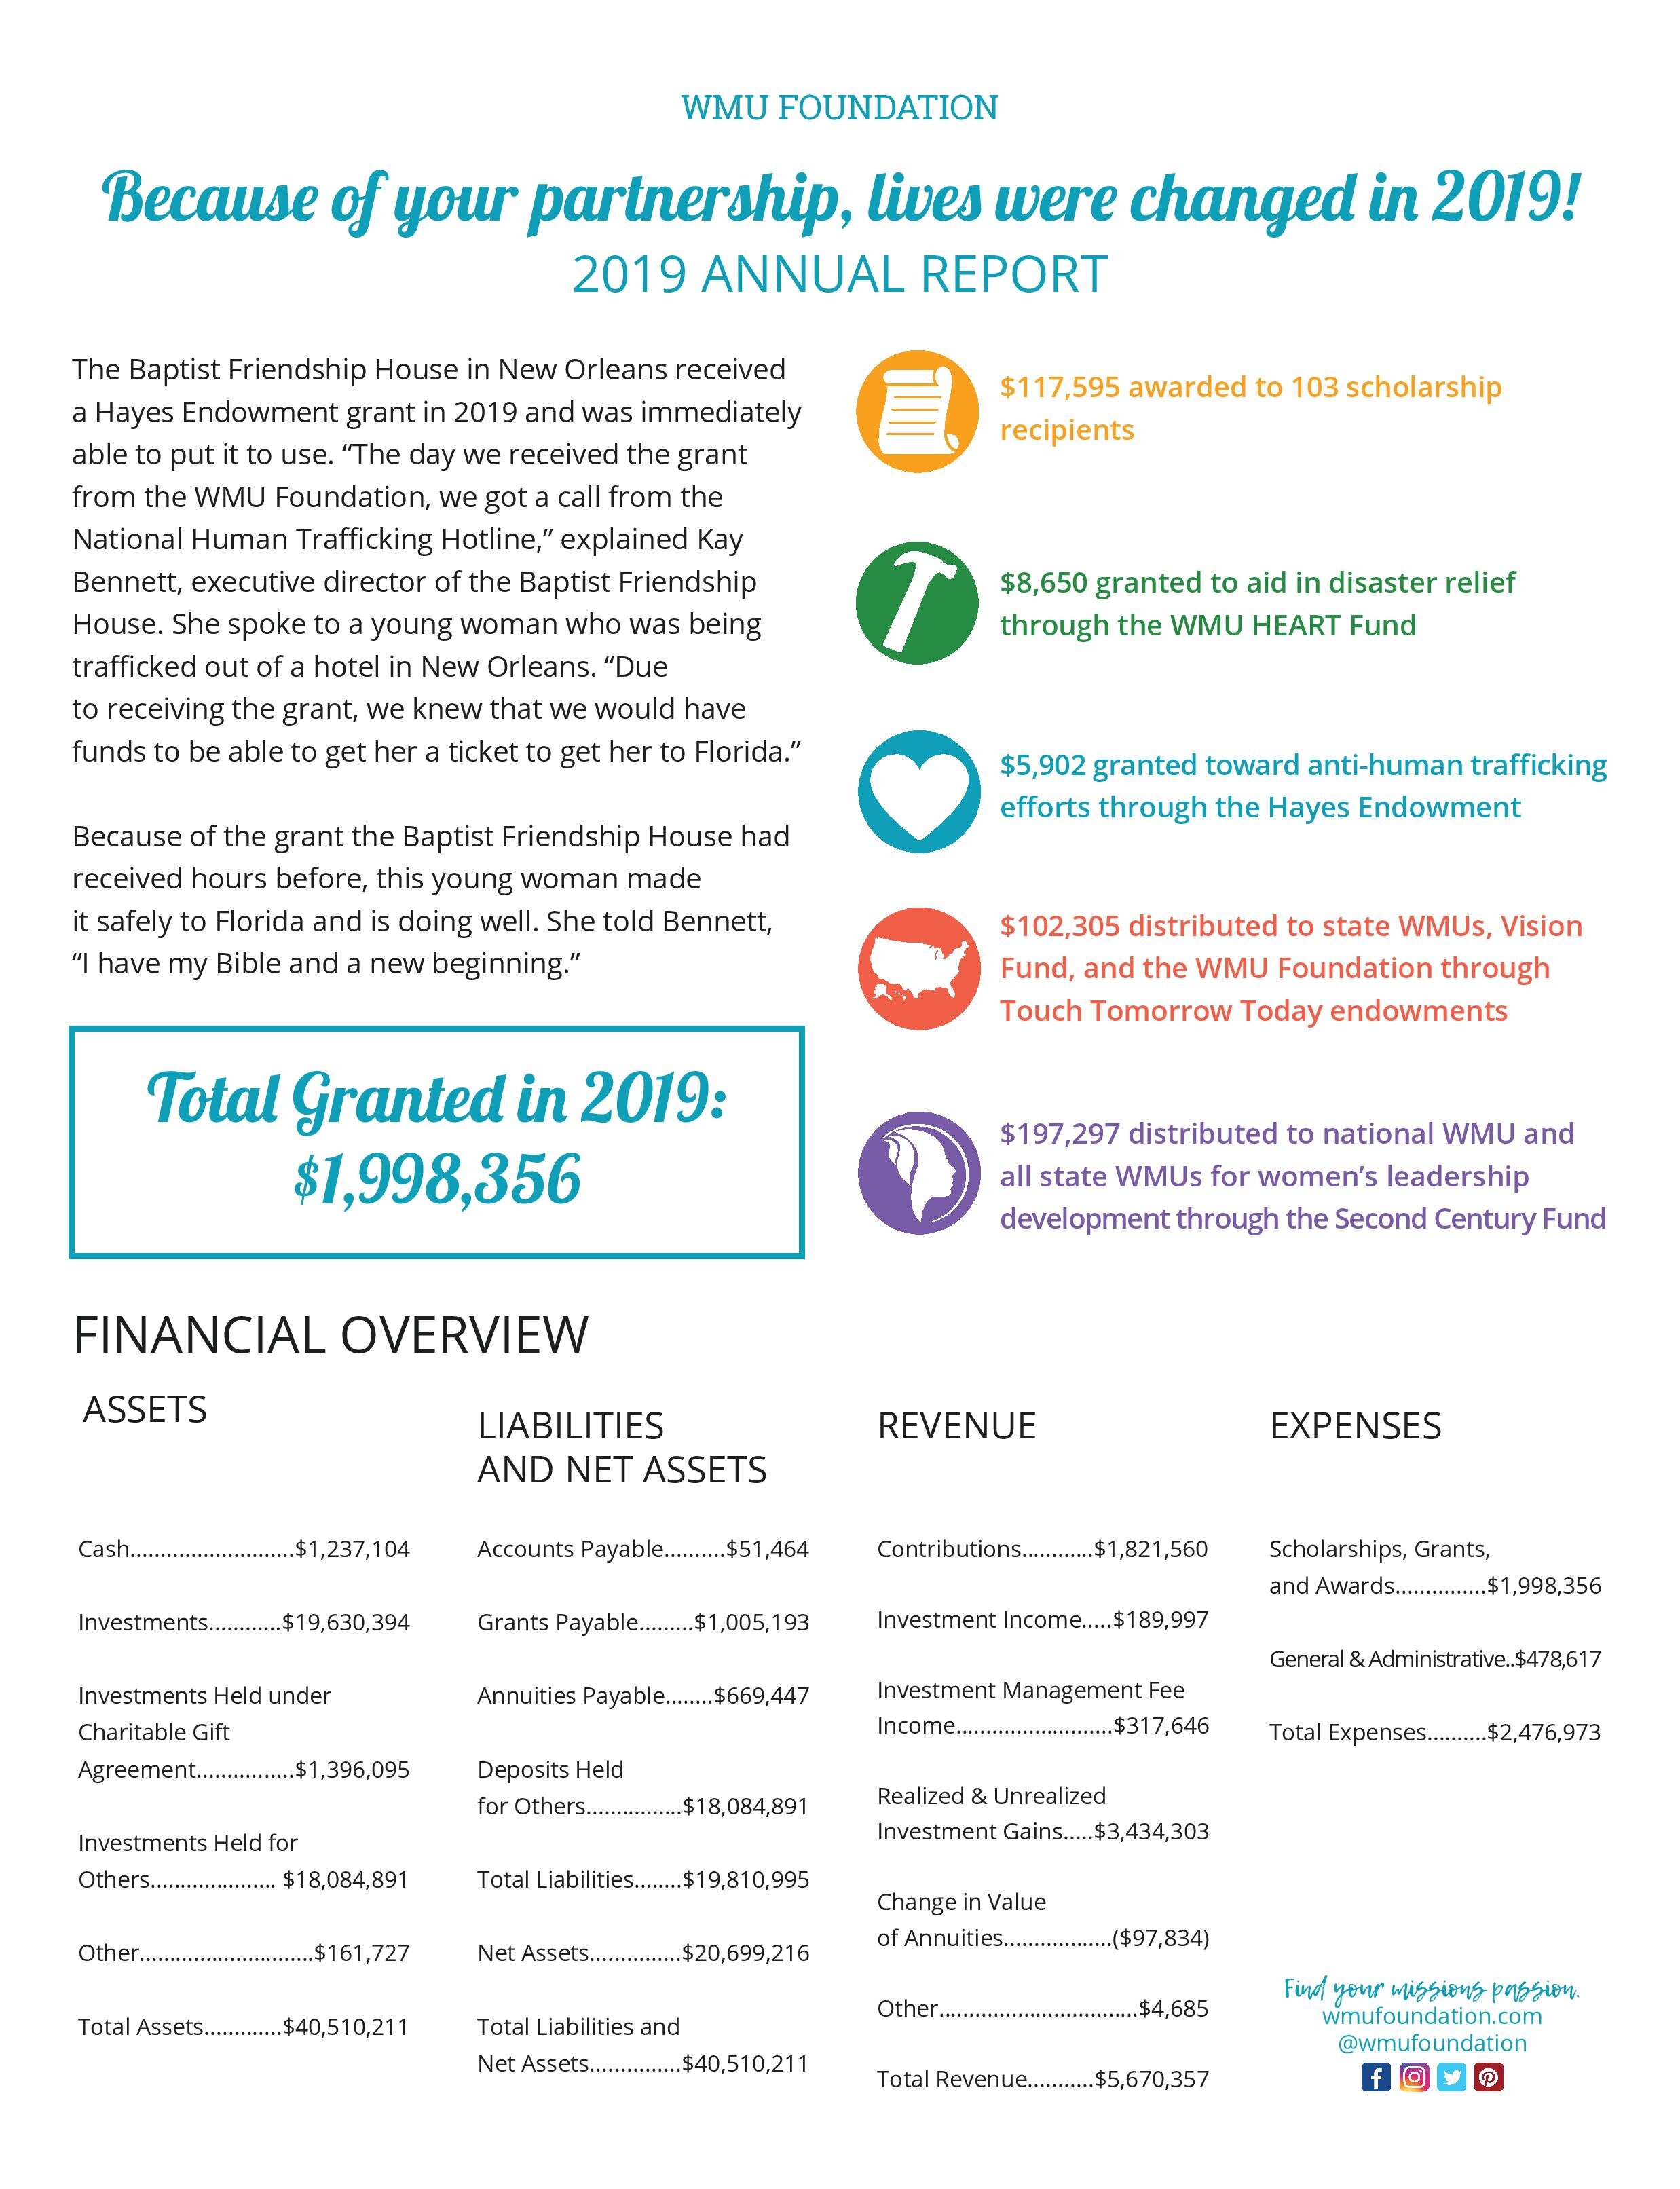 2019 Annual Report02-page-001.jpg